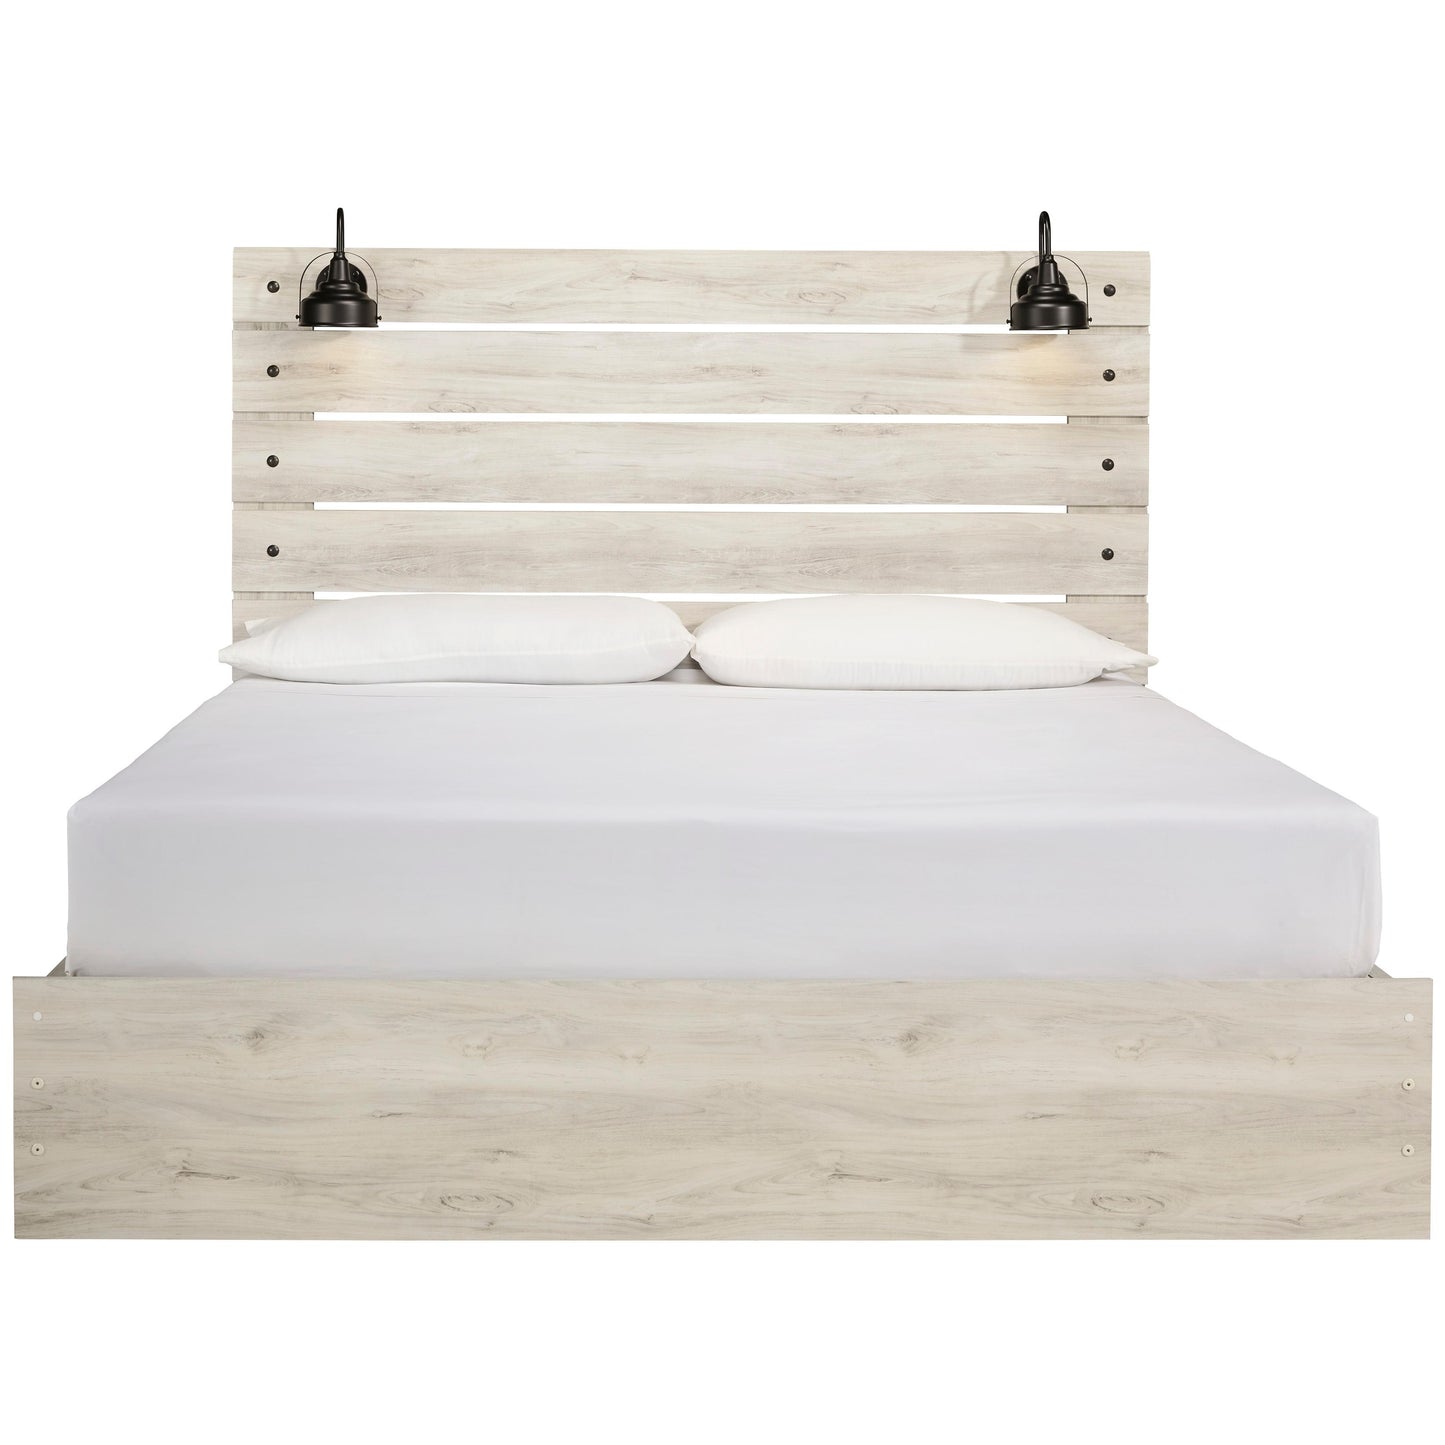 Signature Design by Ashley Cambeck King Panel Bed with Storage B192-58/B192-56/B192-60/B192-60/B100-14